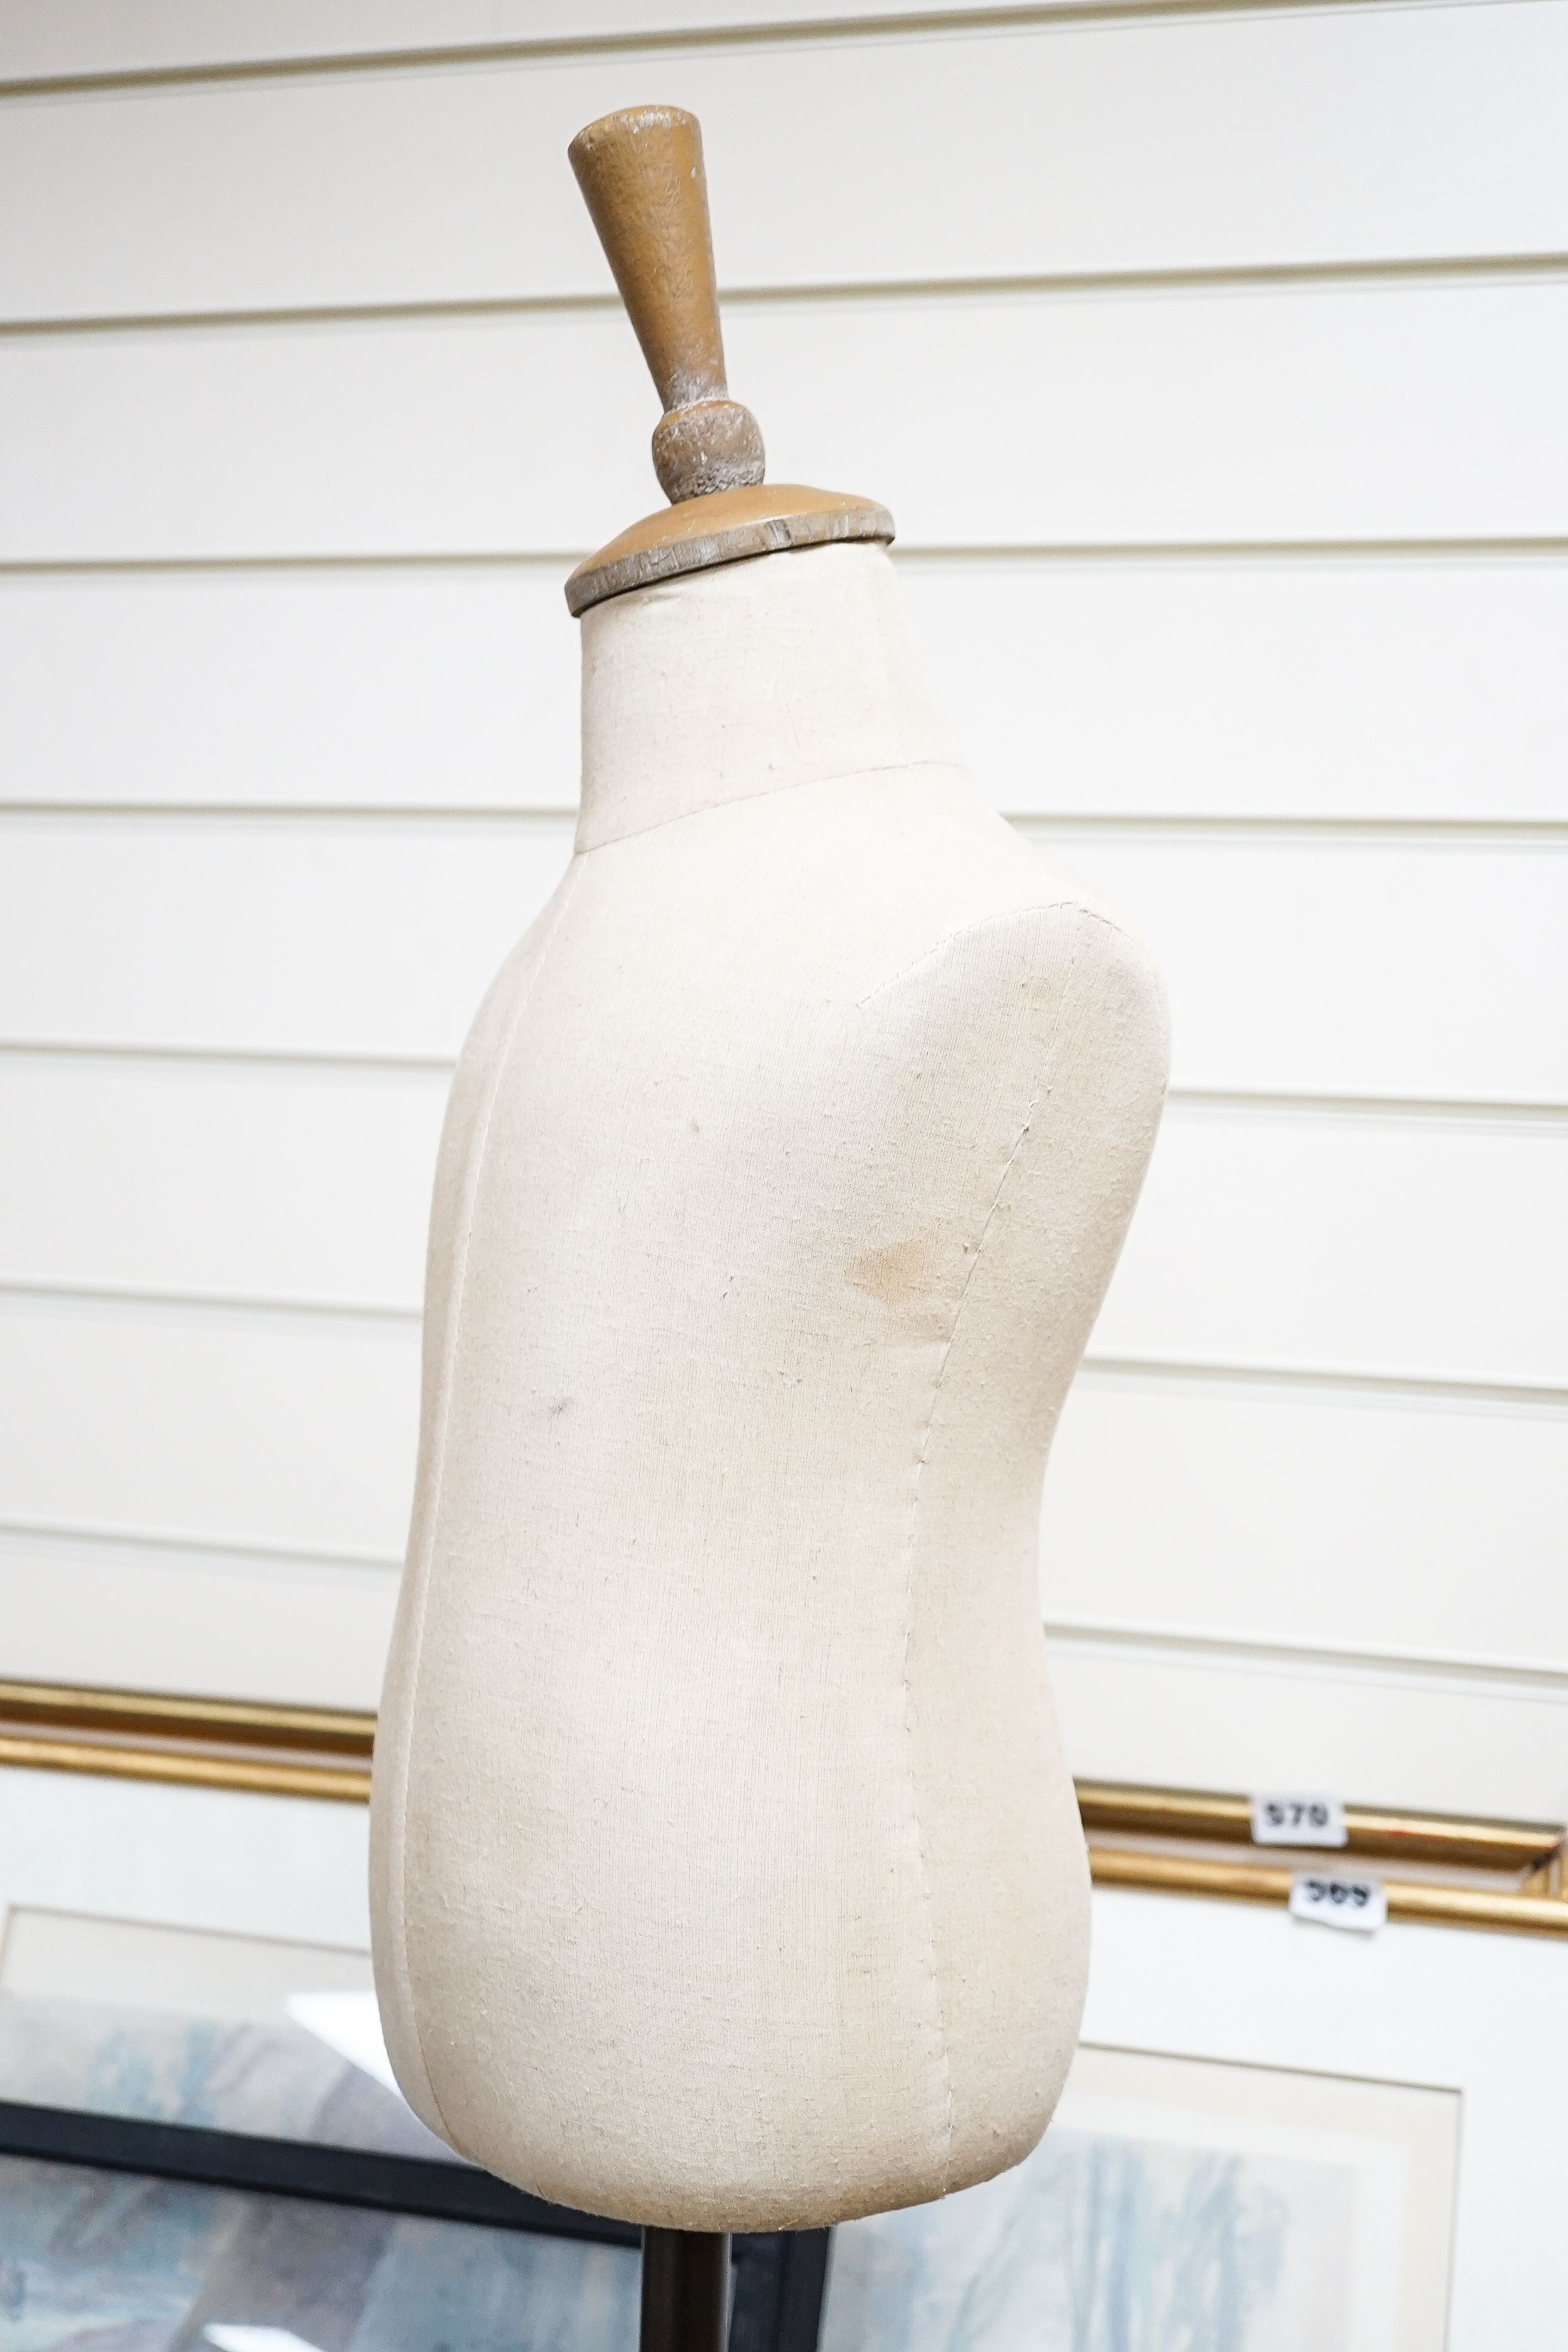 A mannequin on cast iron stand, height 103cm, and a retailer's Thorne's Toffee can